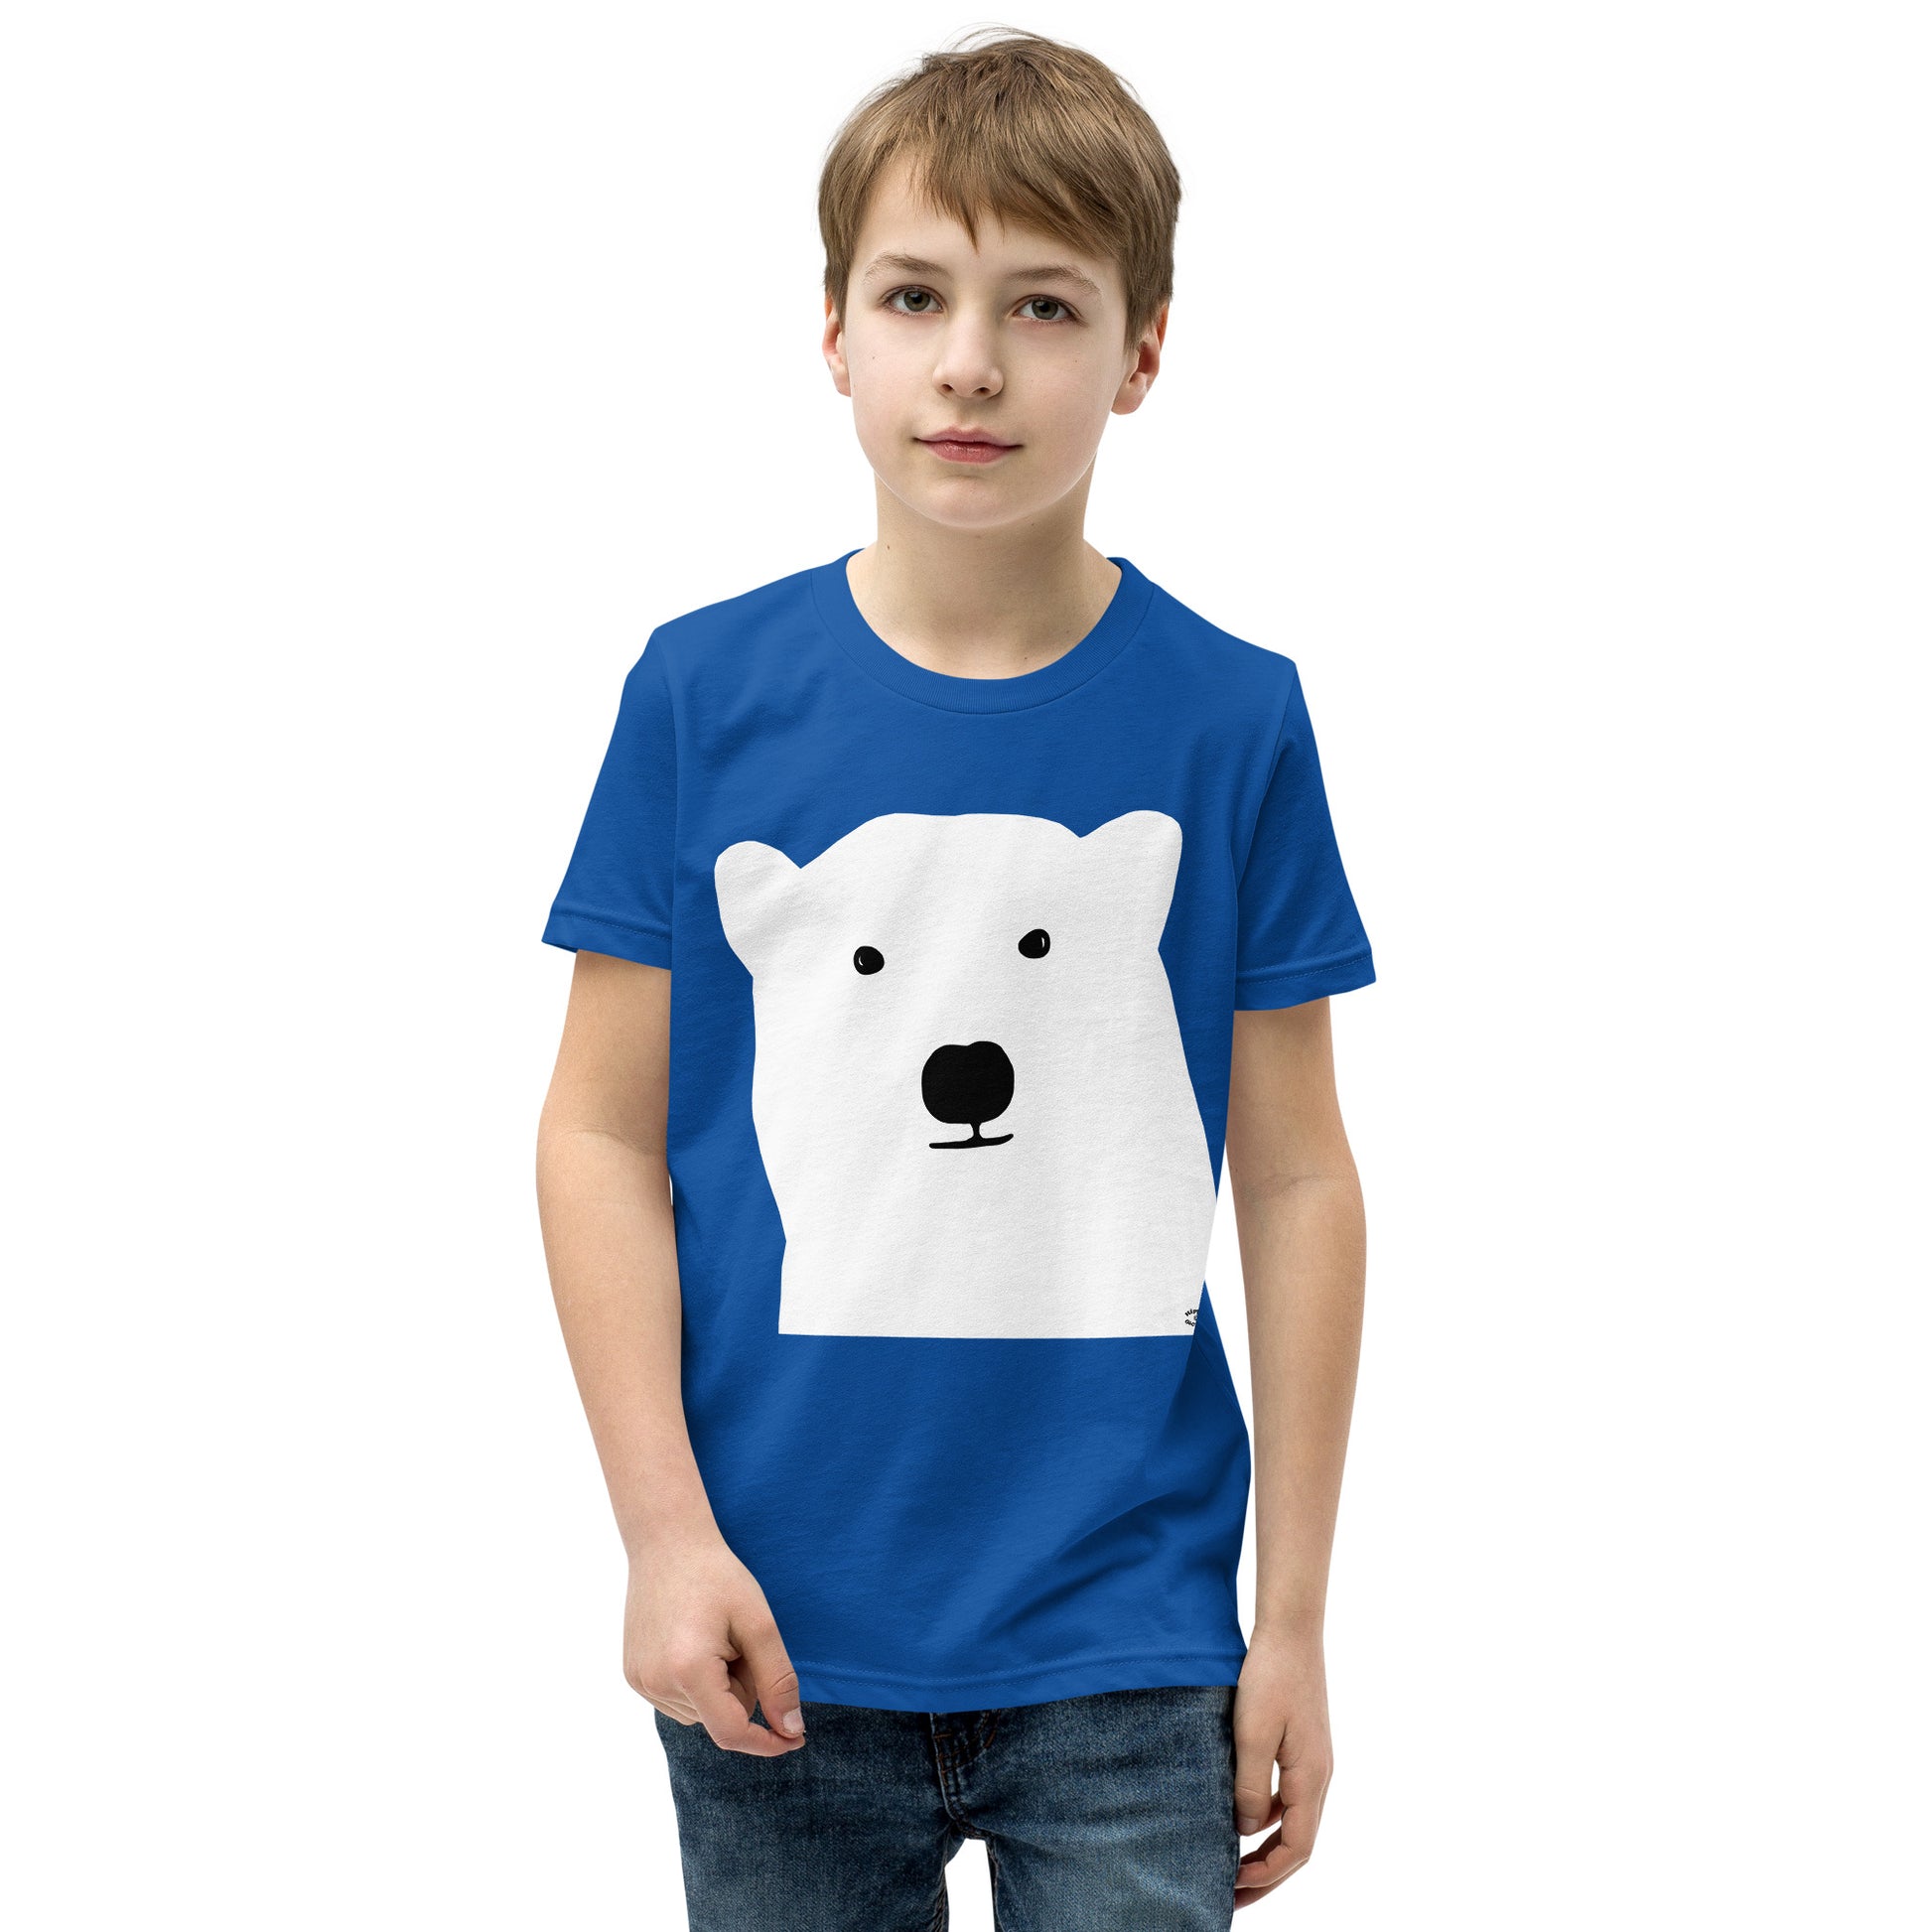 A picture of a young boy wearing a short sleeve tshirt with a kool polar bear face on the front-royal blue-front